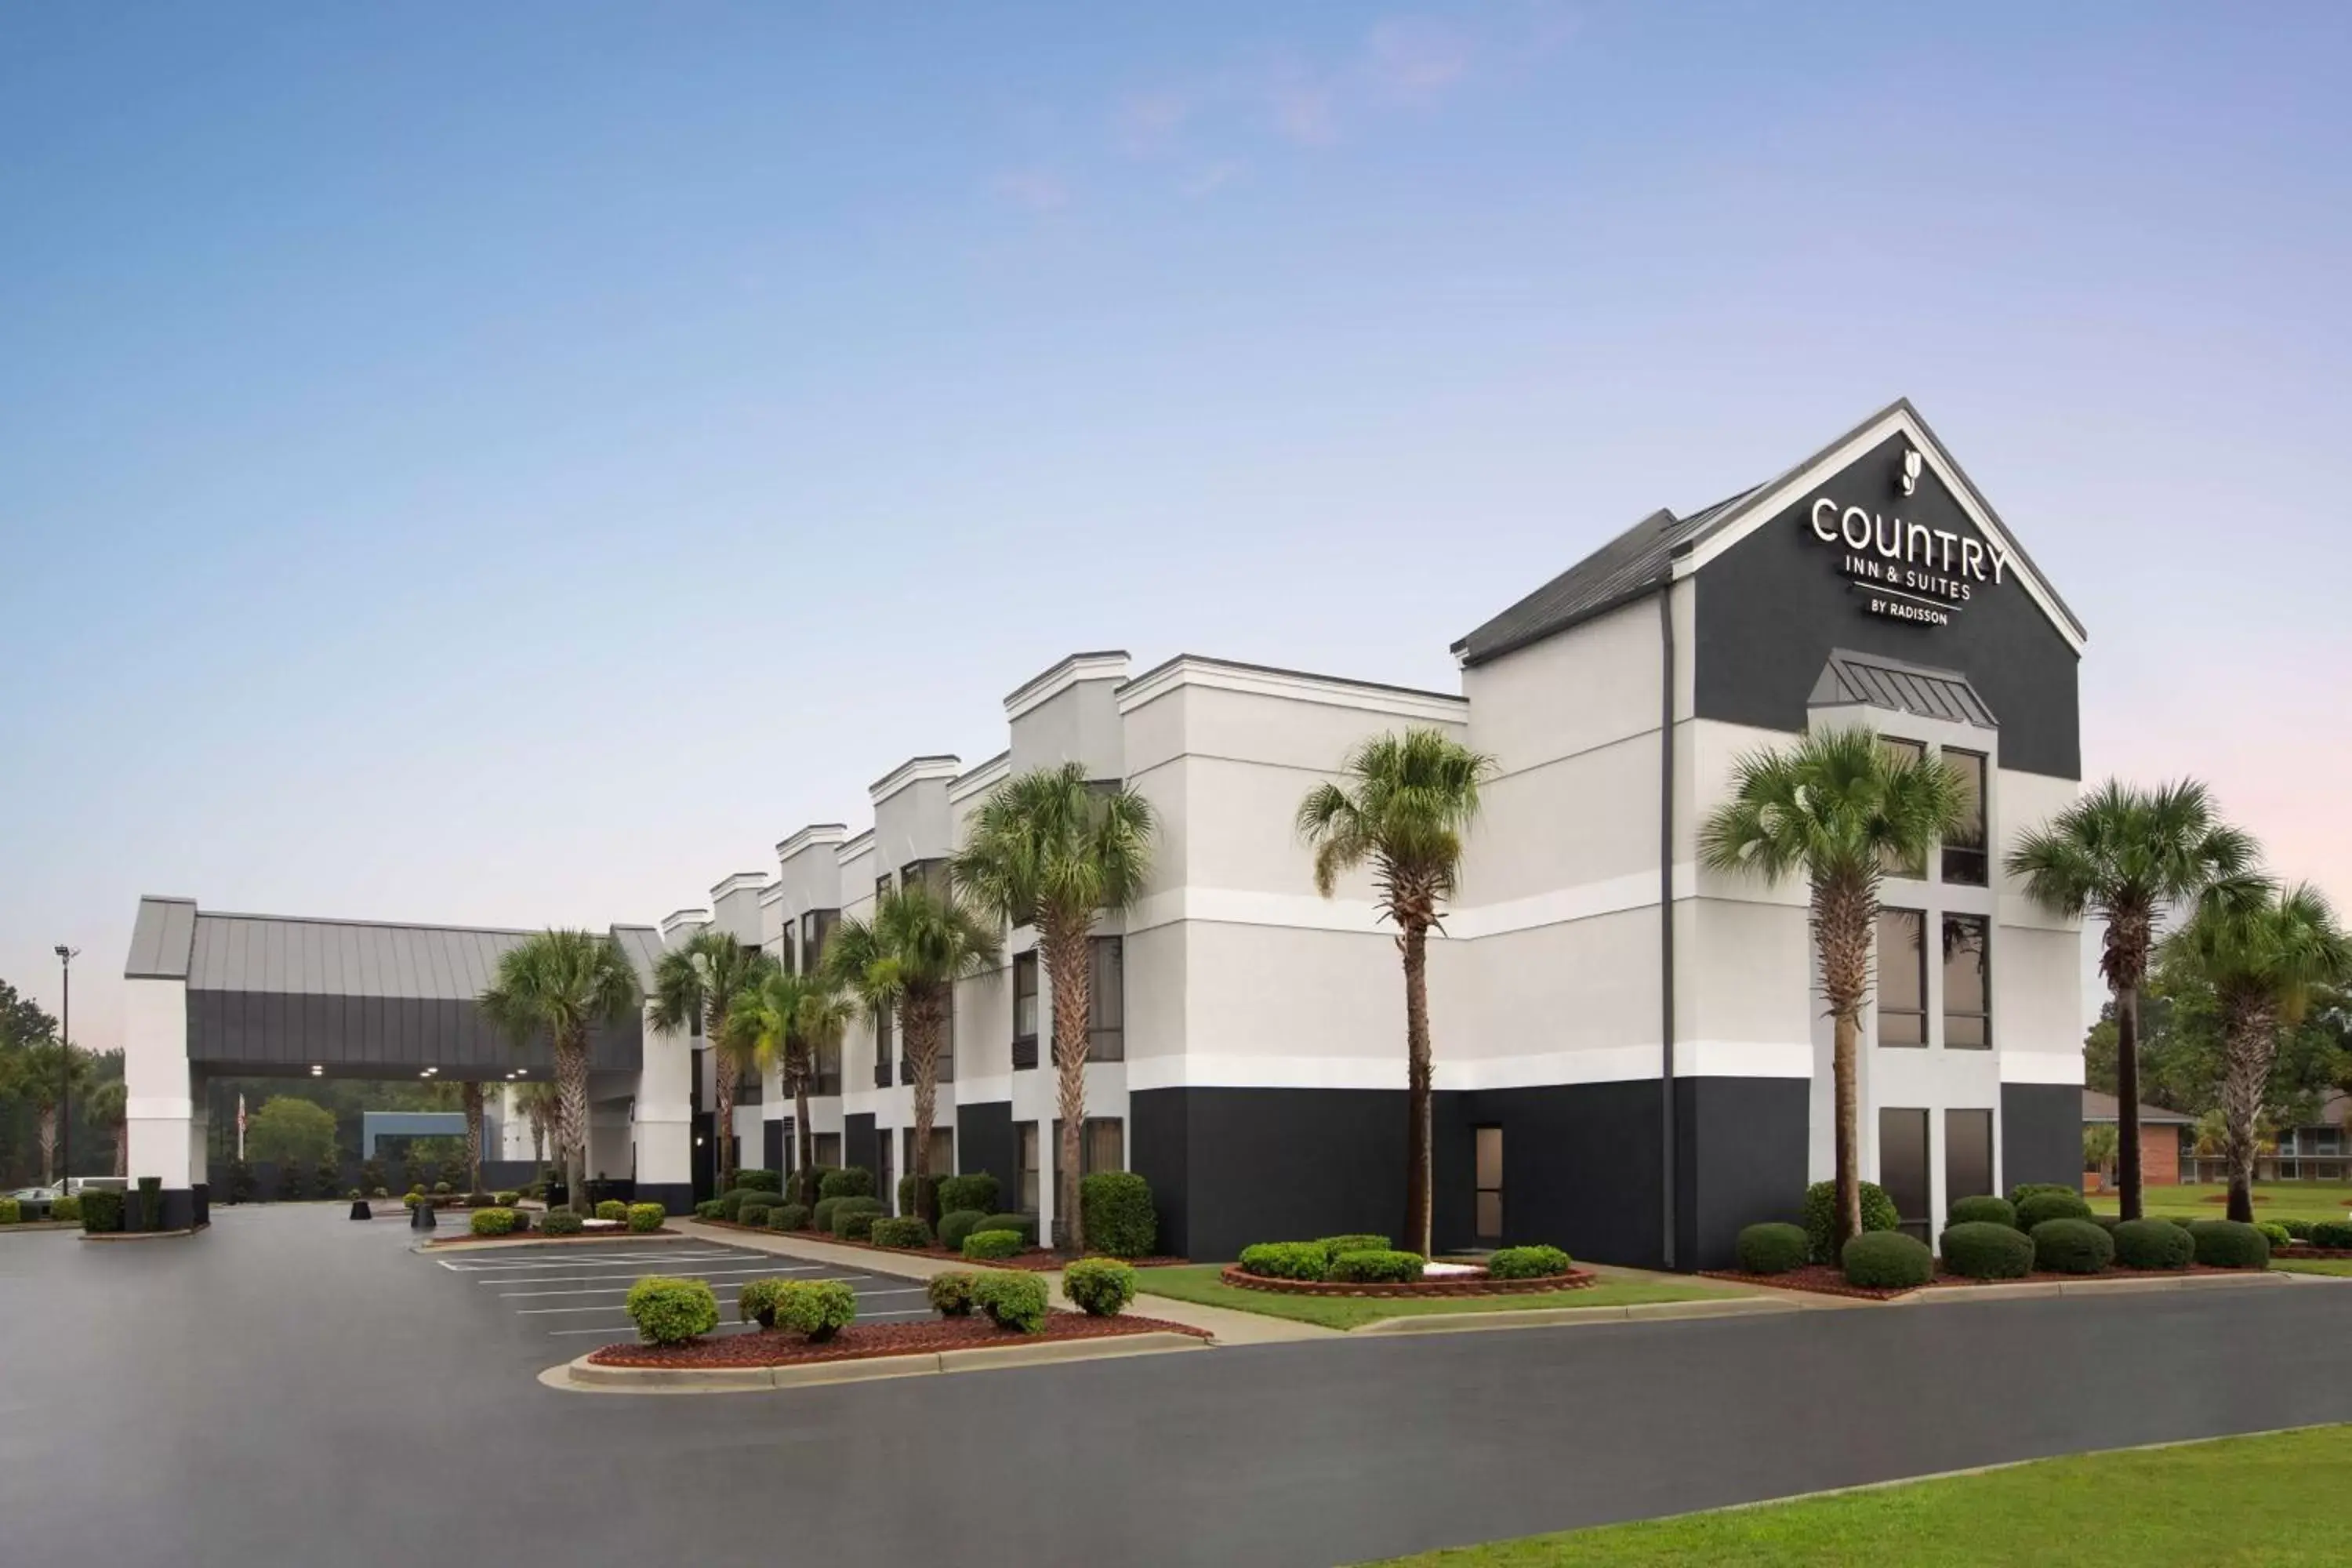 Property Building in Country Inn & Suites by Radisson, Florence, SC